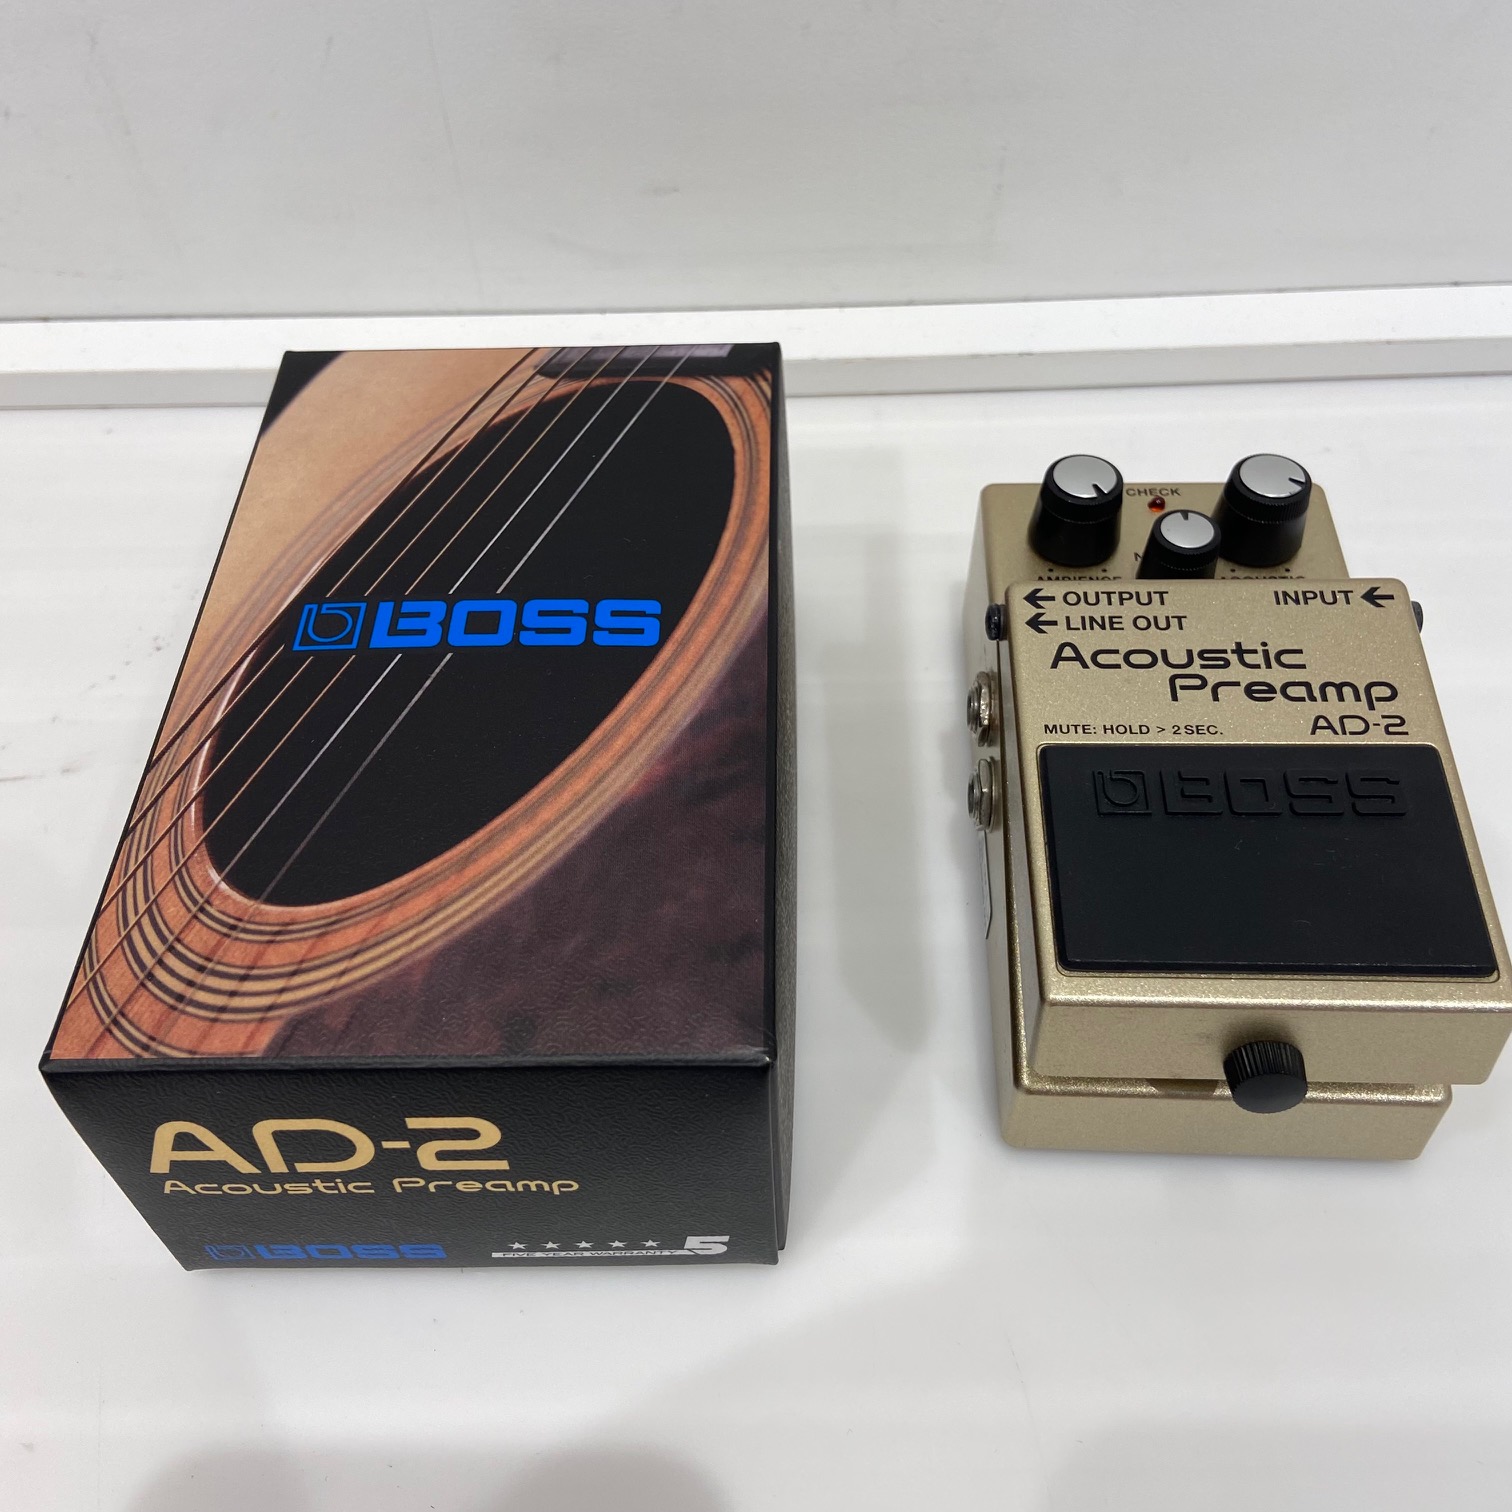 BOSS AD-2 Acoustic Preamp アコギ用 プリアンプAD2 ボス 